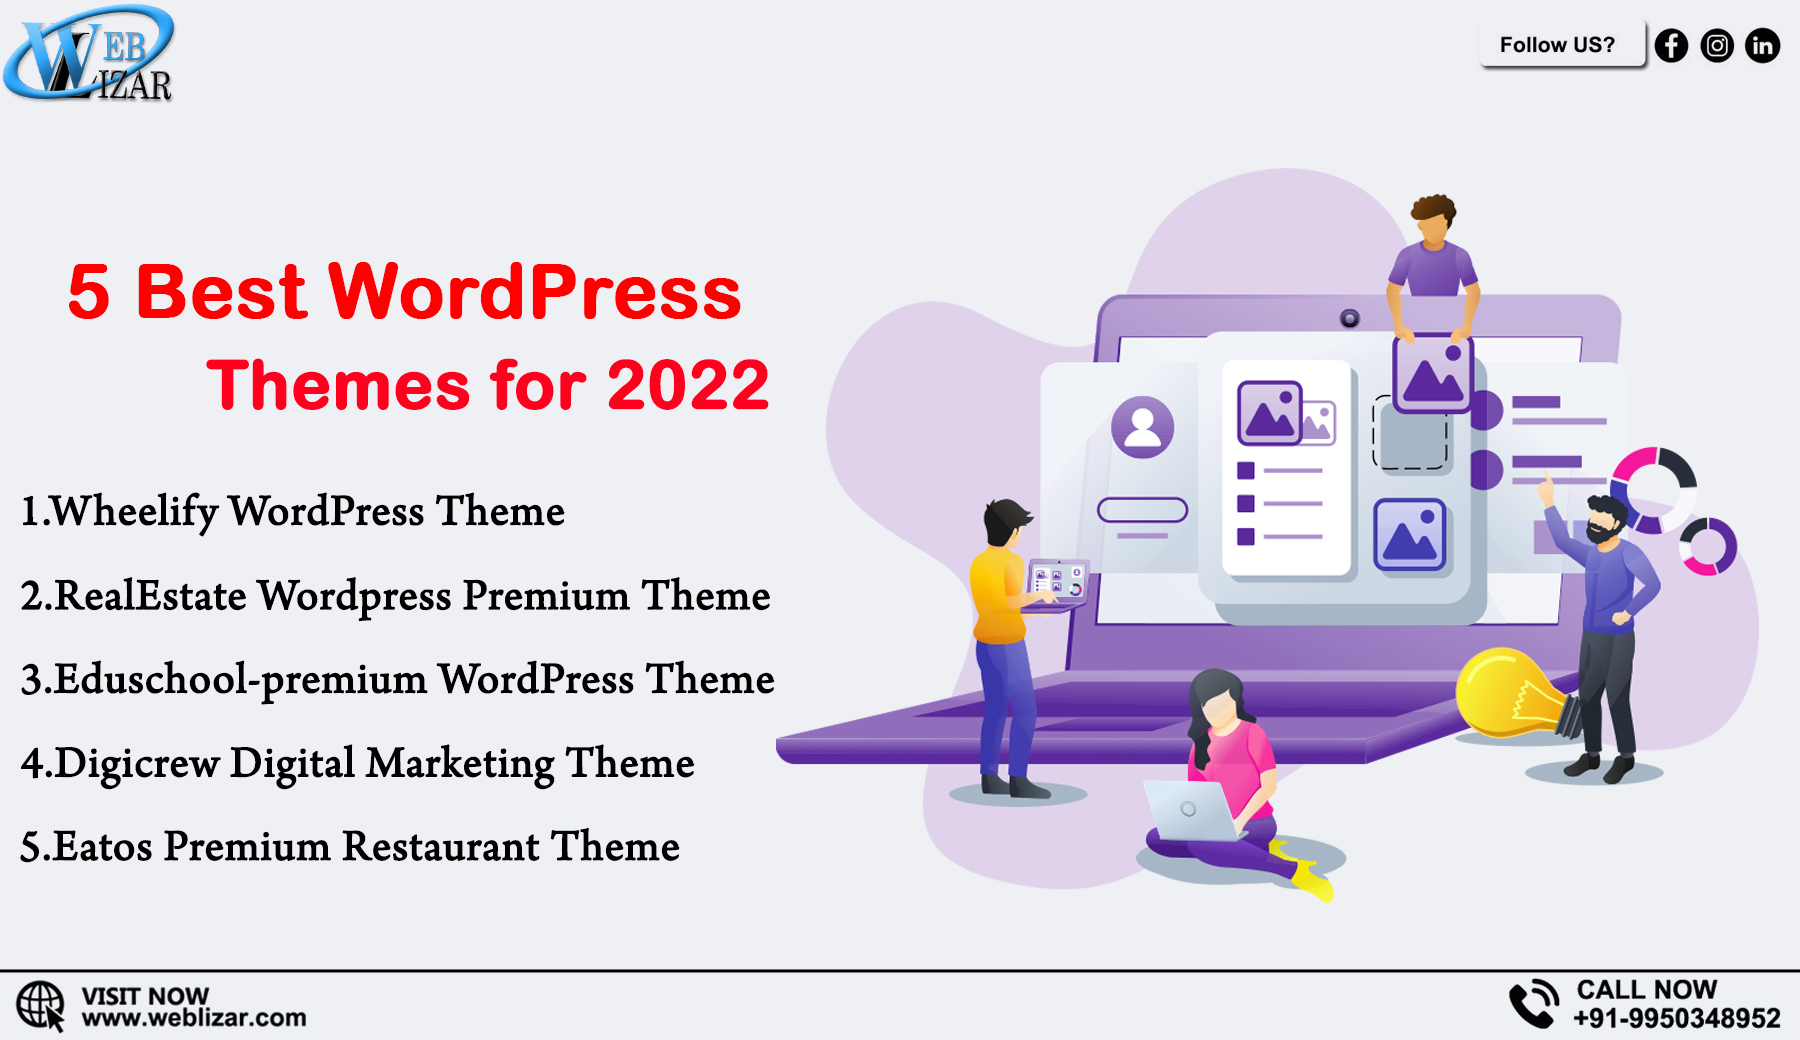 5 Of The Best WordPress Themes for 2022